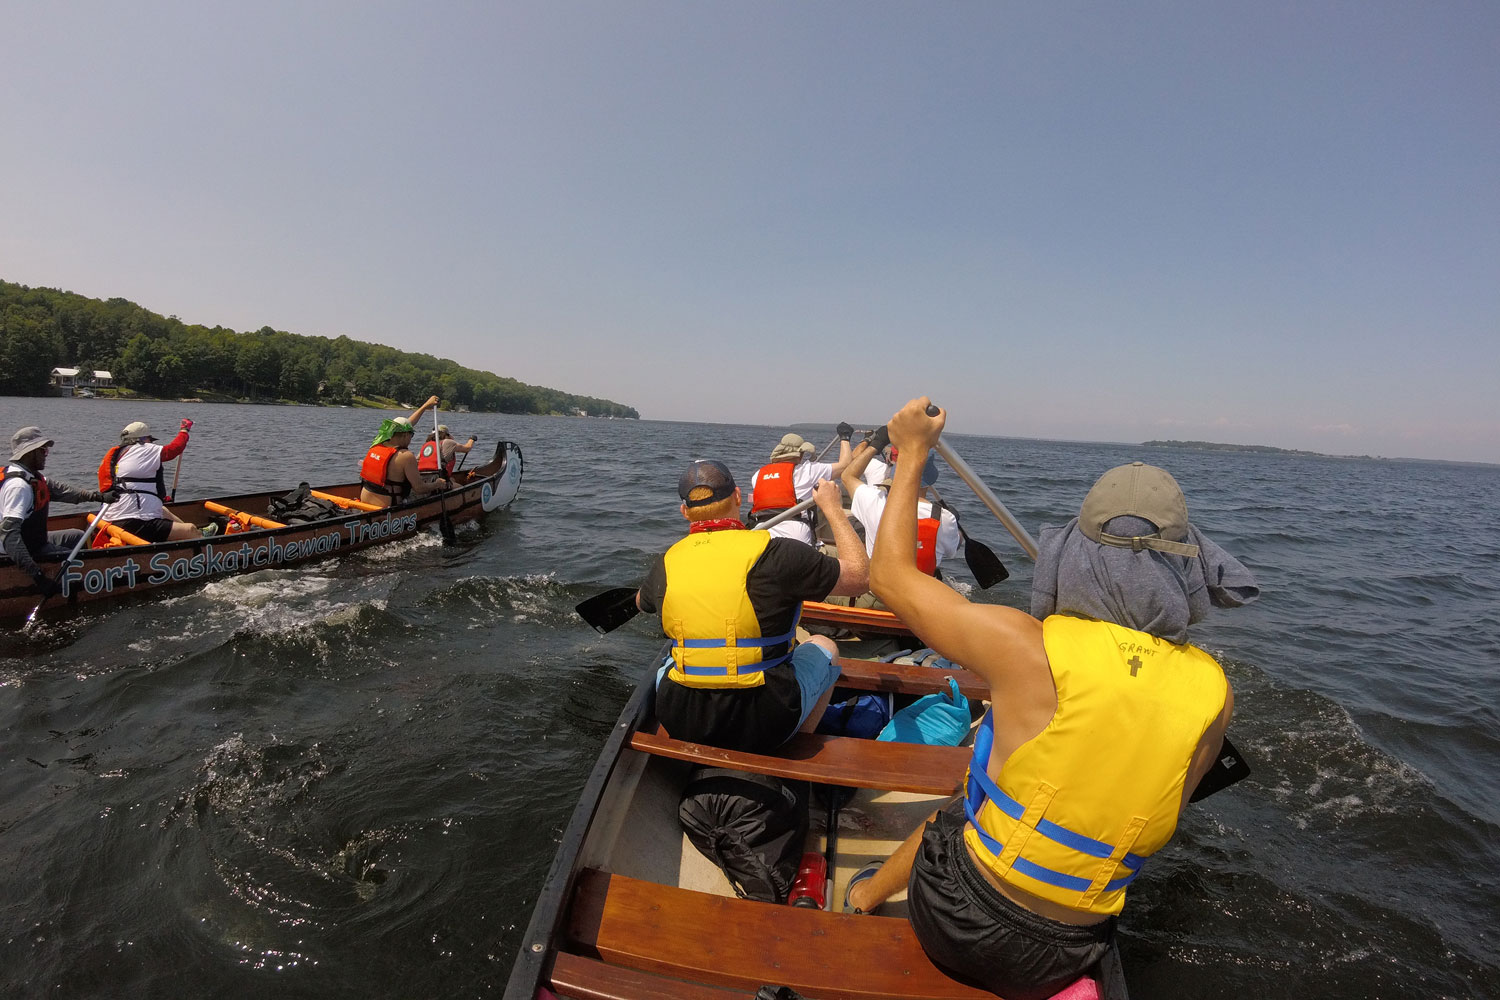 Paddling to Wreck Island, two canoes race to the next stop.